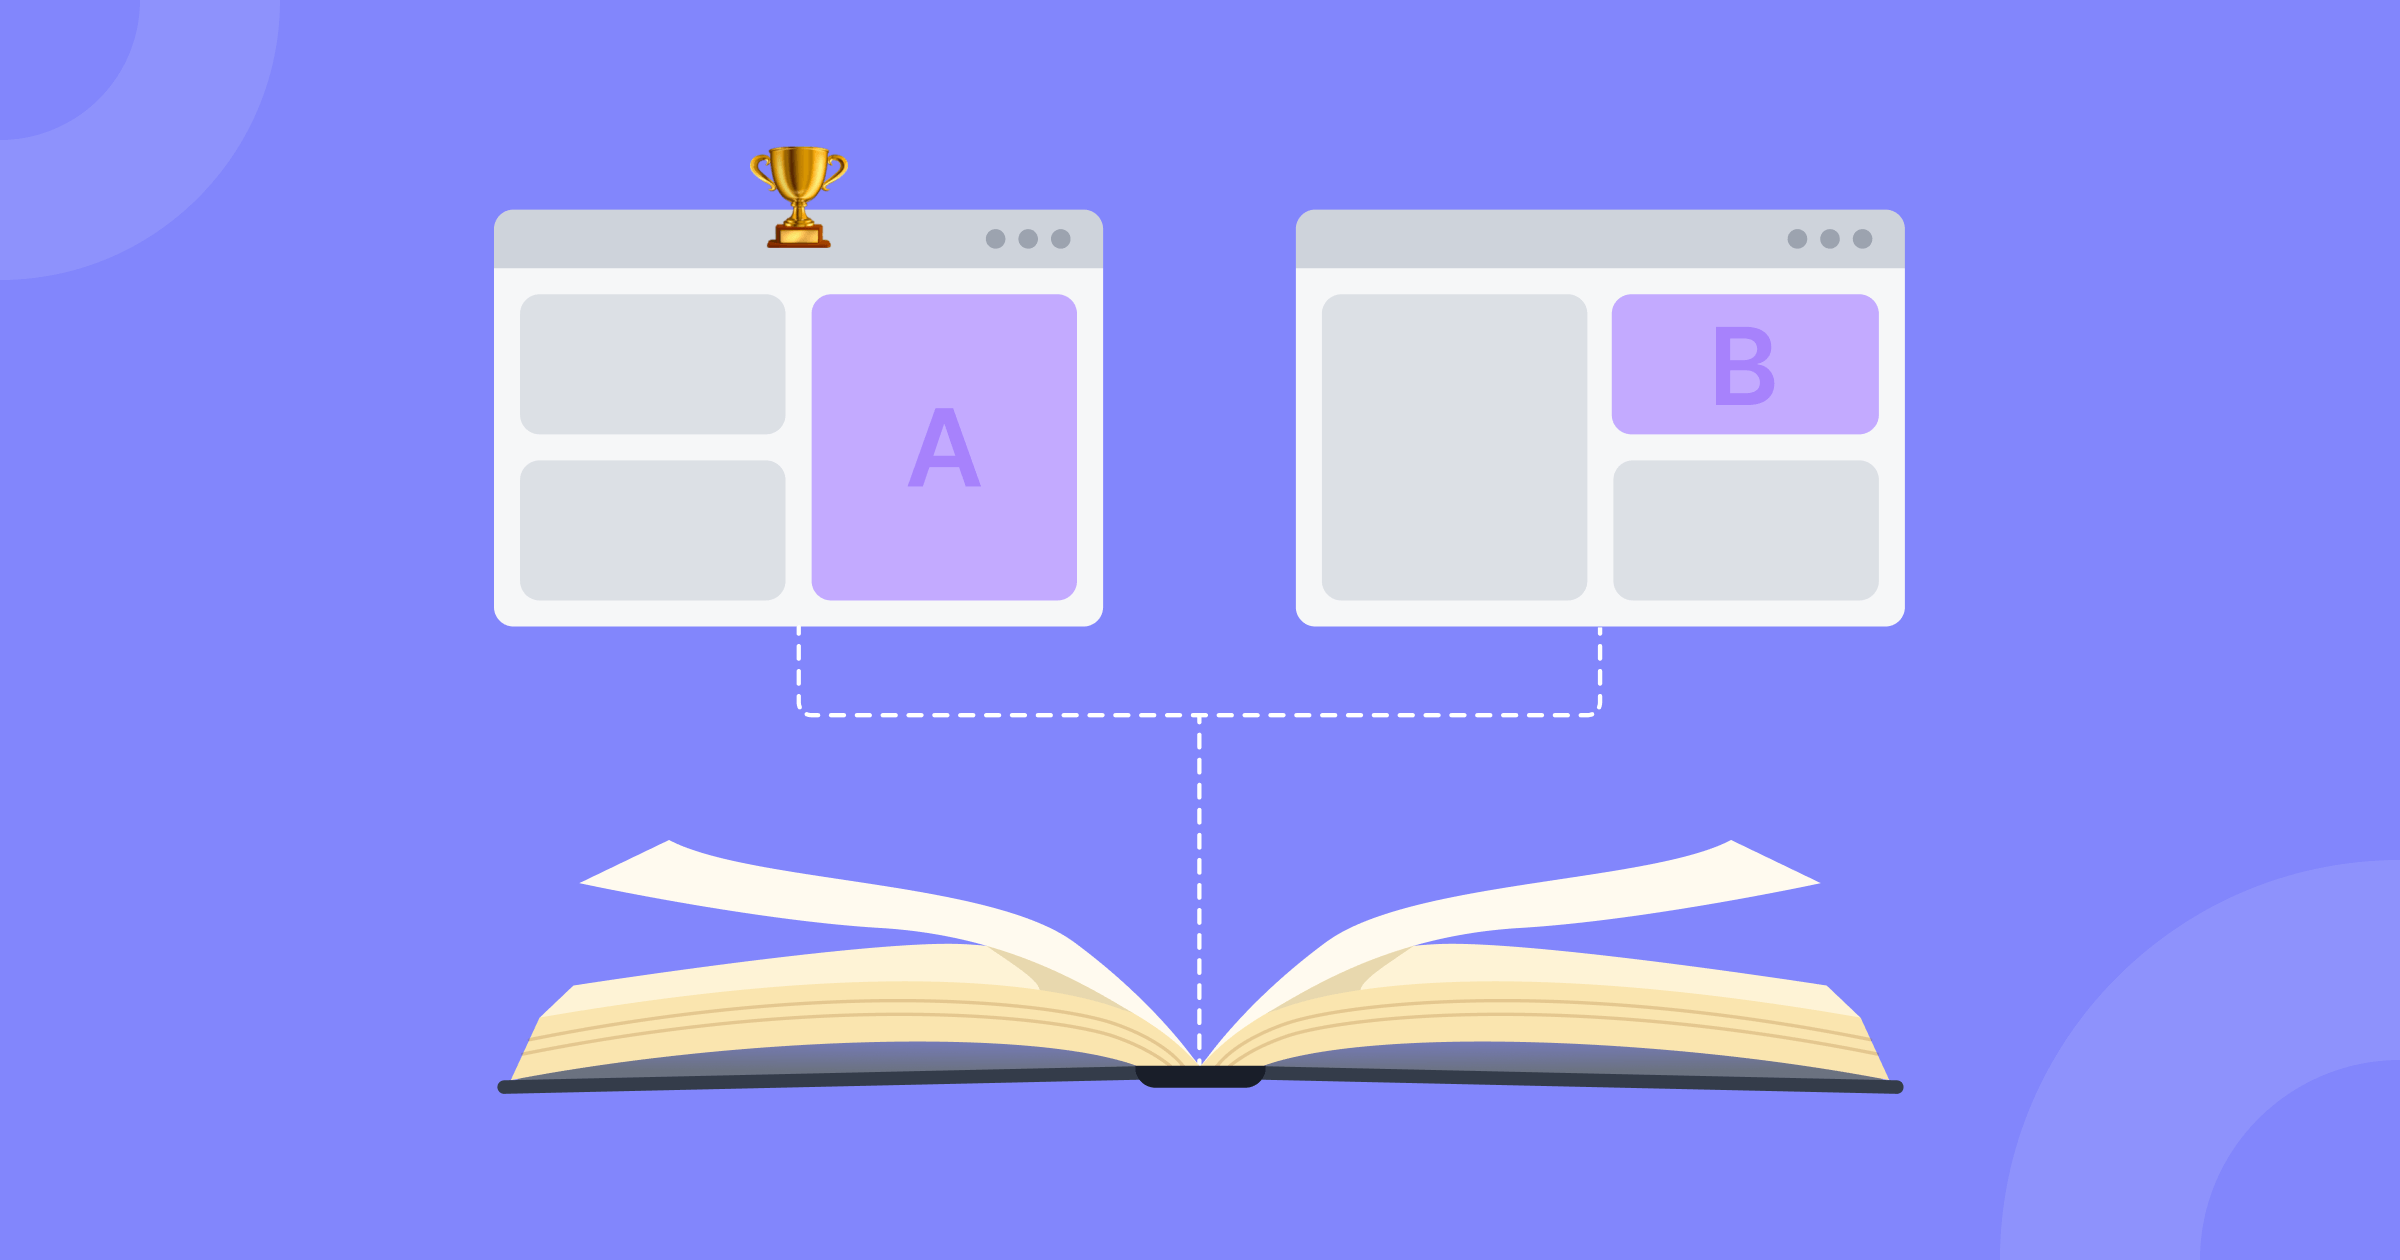 An open book linked to two wireframes, one with the letter A on it, and the other one with the letter B. Wireframe A has a trophy in front of it, indicating it is the winner of the test.